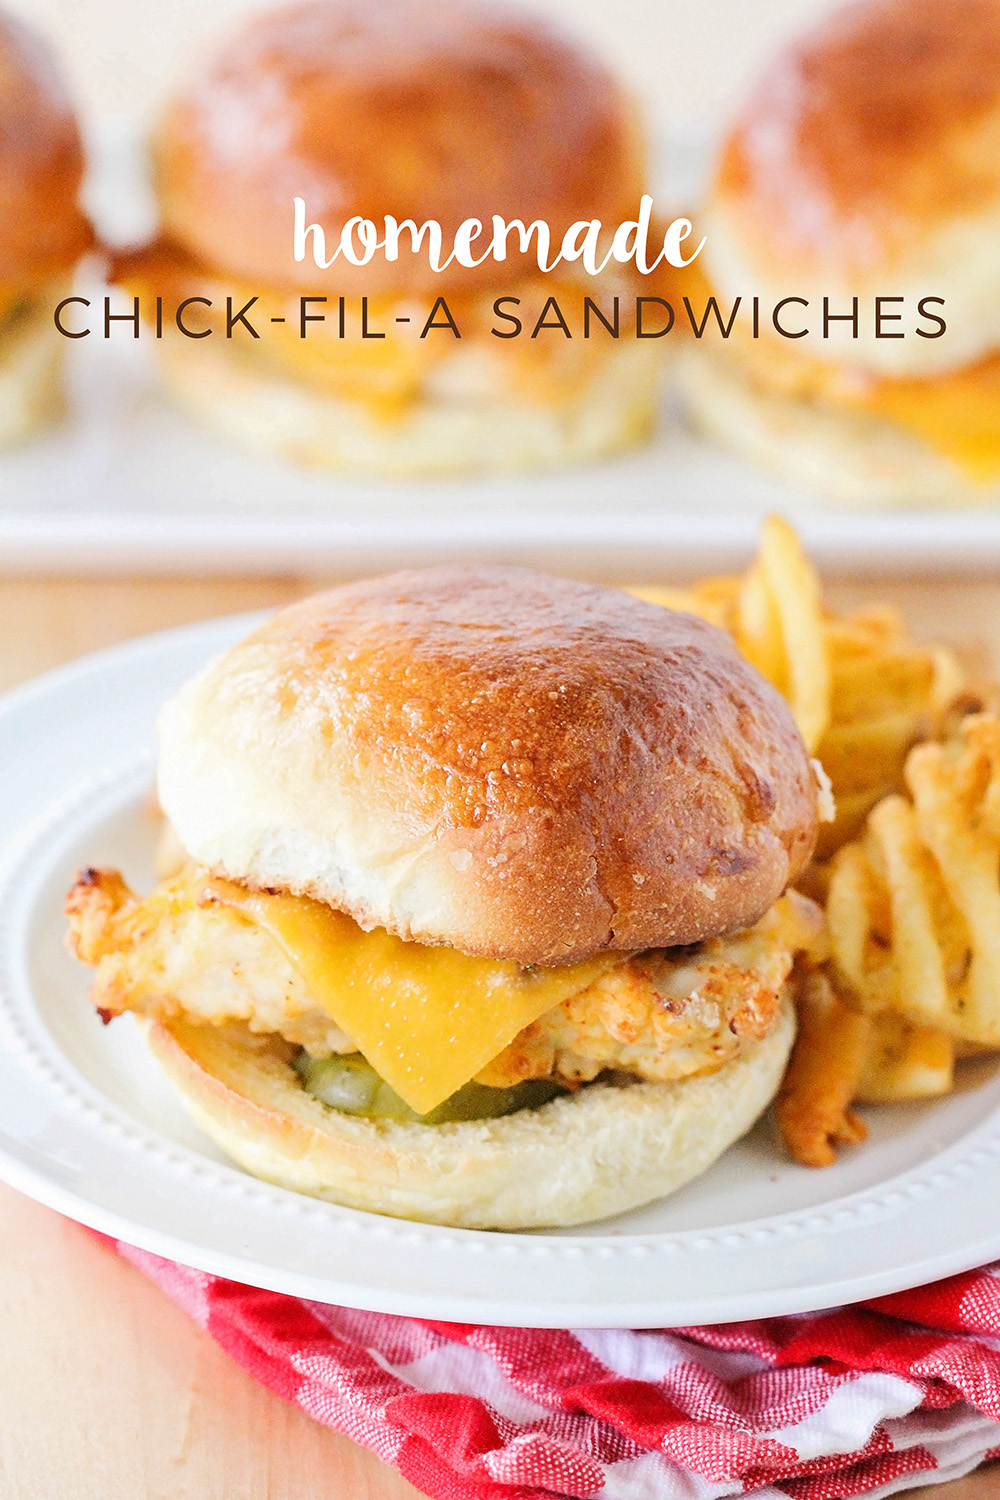 These homemade Chick Fil A sandwiches are so savory and delicious! They're baked, not fried, but just as tasty as the original!